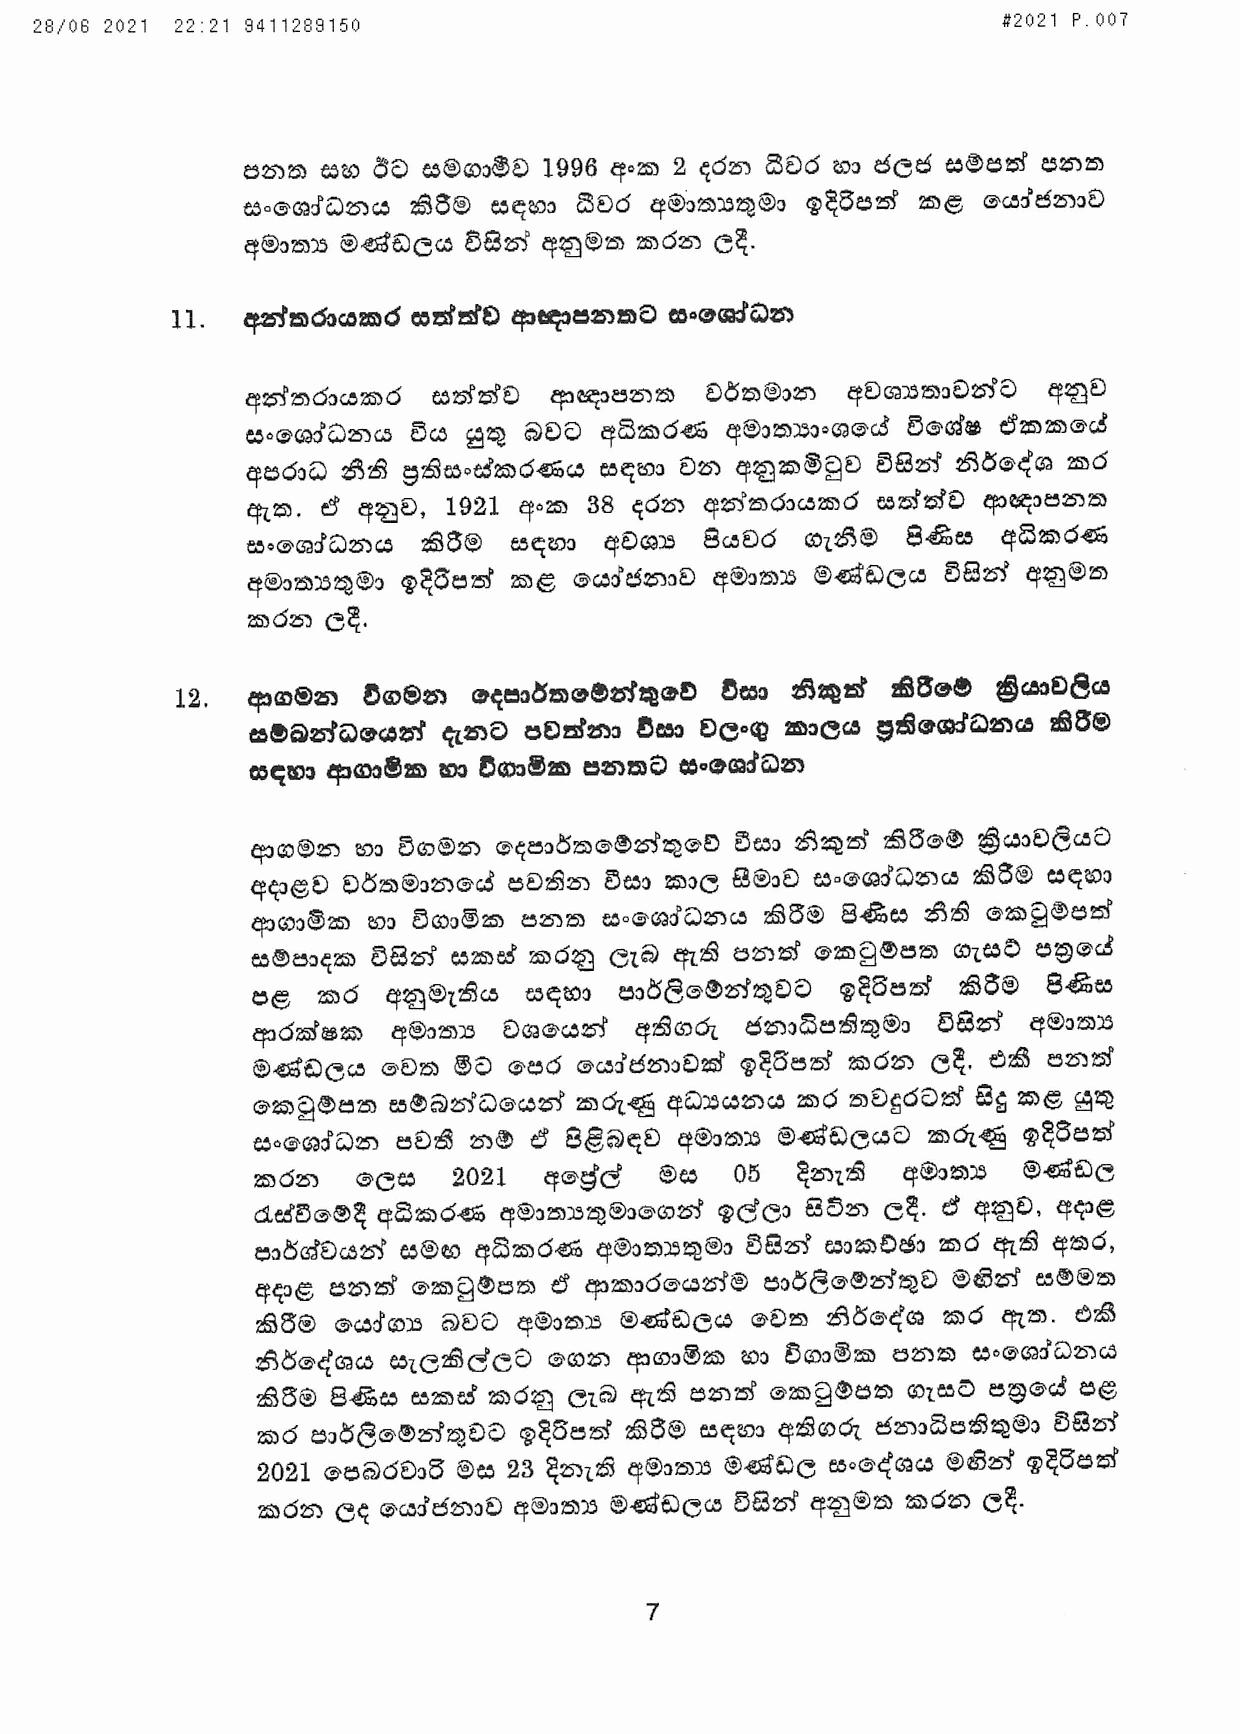 Cabinet Decision on 28.06.2021 page 007